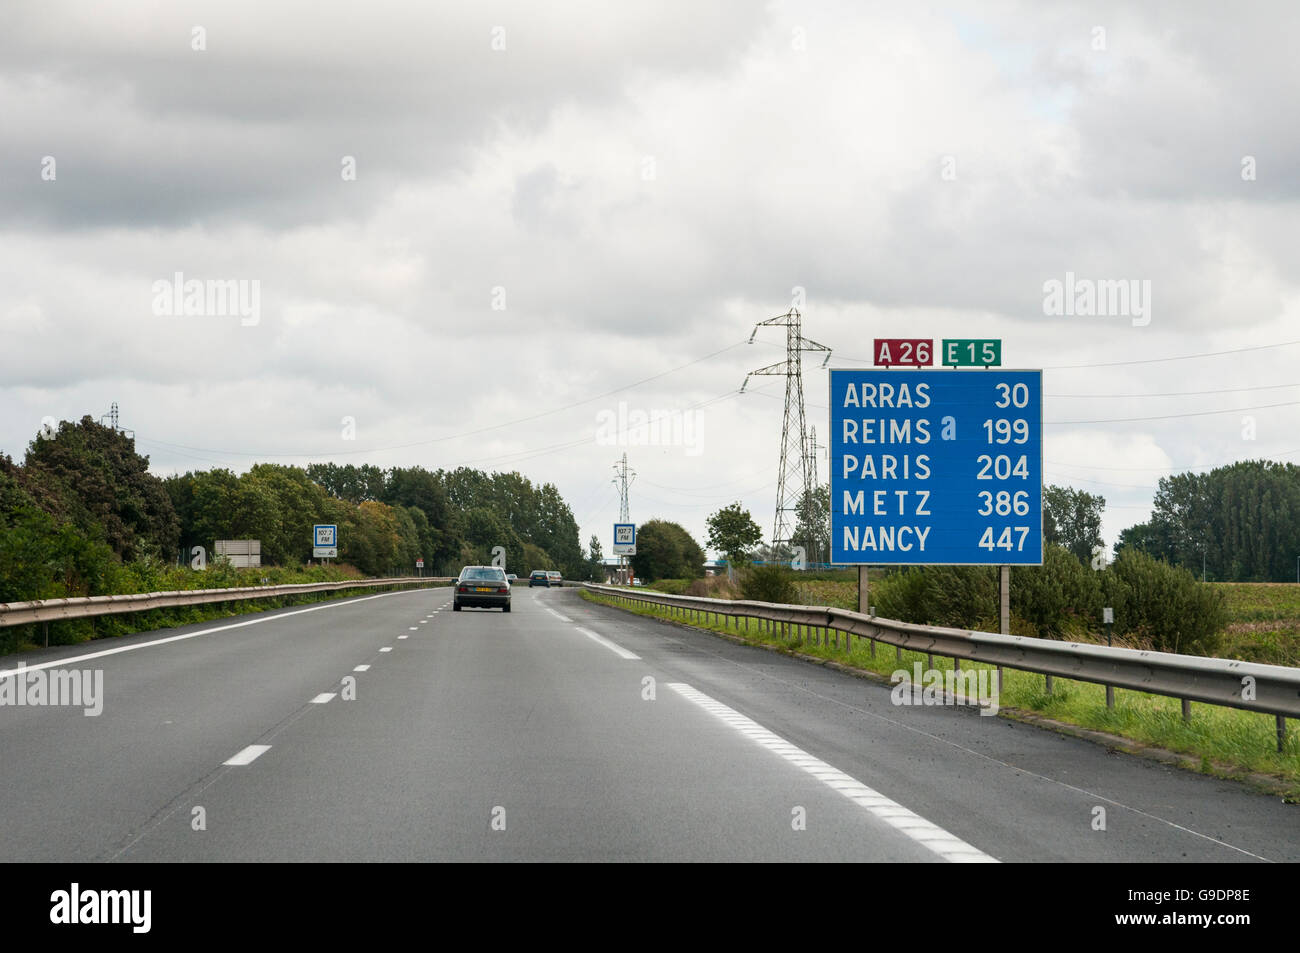 Distance sign on A26 E15 motorway in France Stock Photo